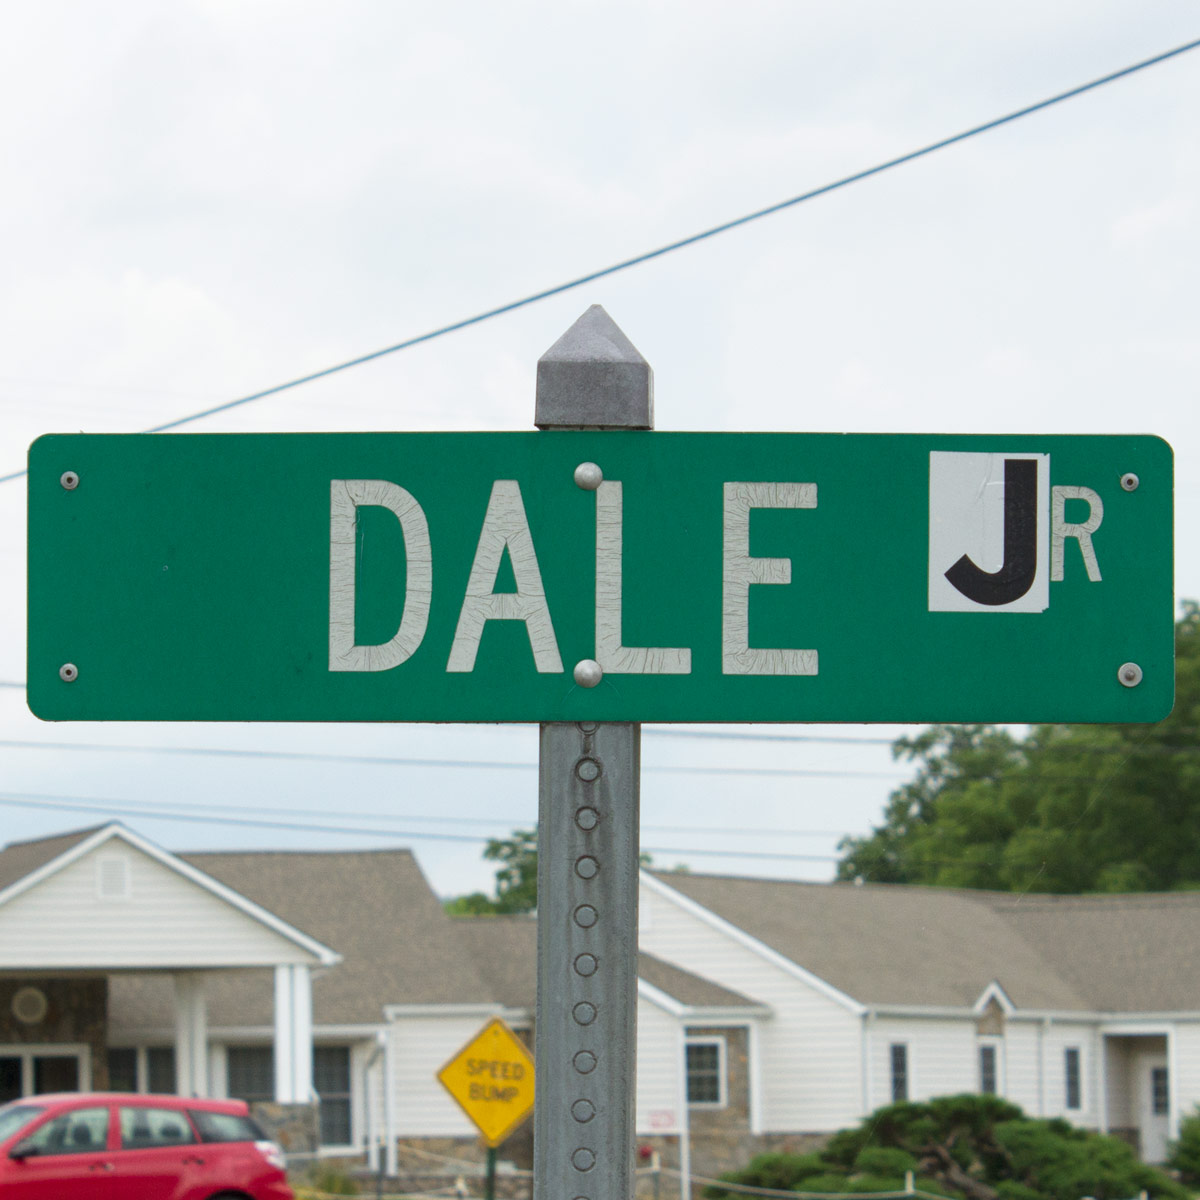 Street sign that once read ‘Dale Dr’ but now reads ‘Dale Jr’ as a result of someone having placed a sticker with the letter ‘J’ over the letter ‘D’ in ‘Dr’